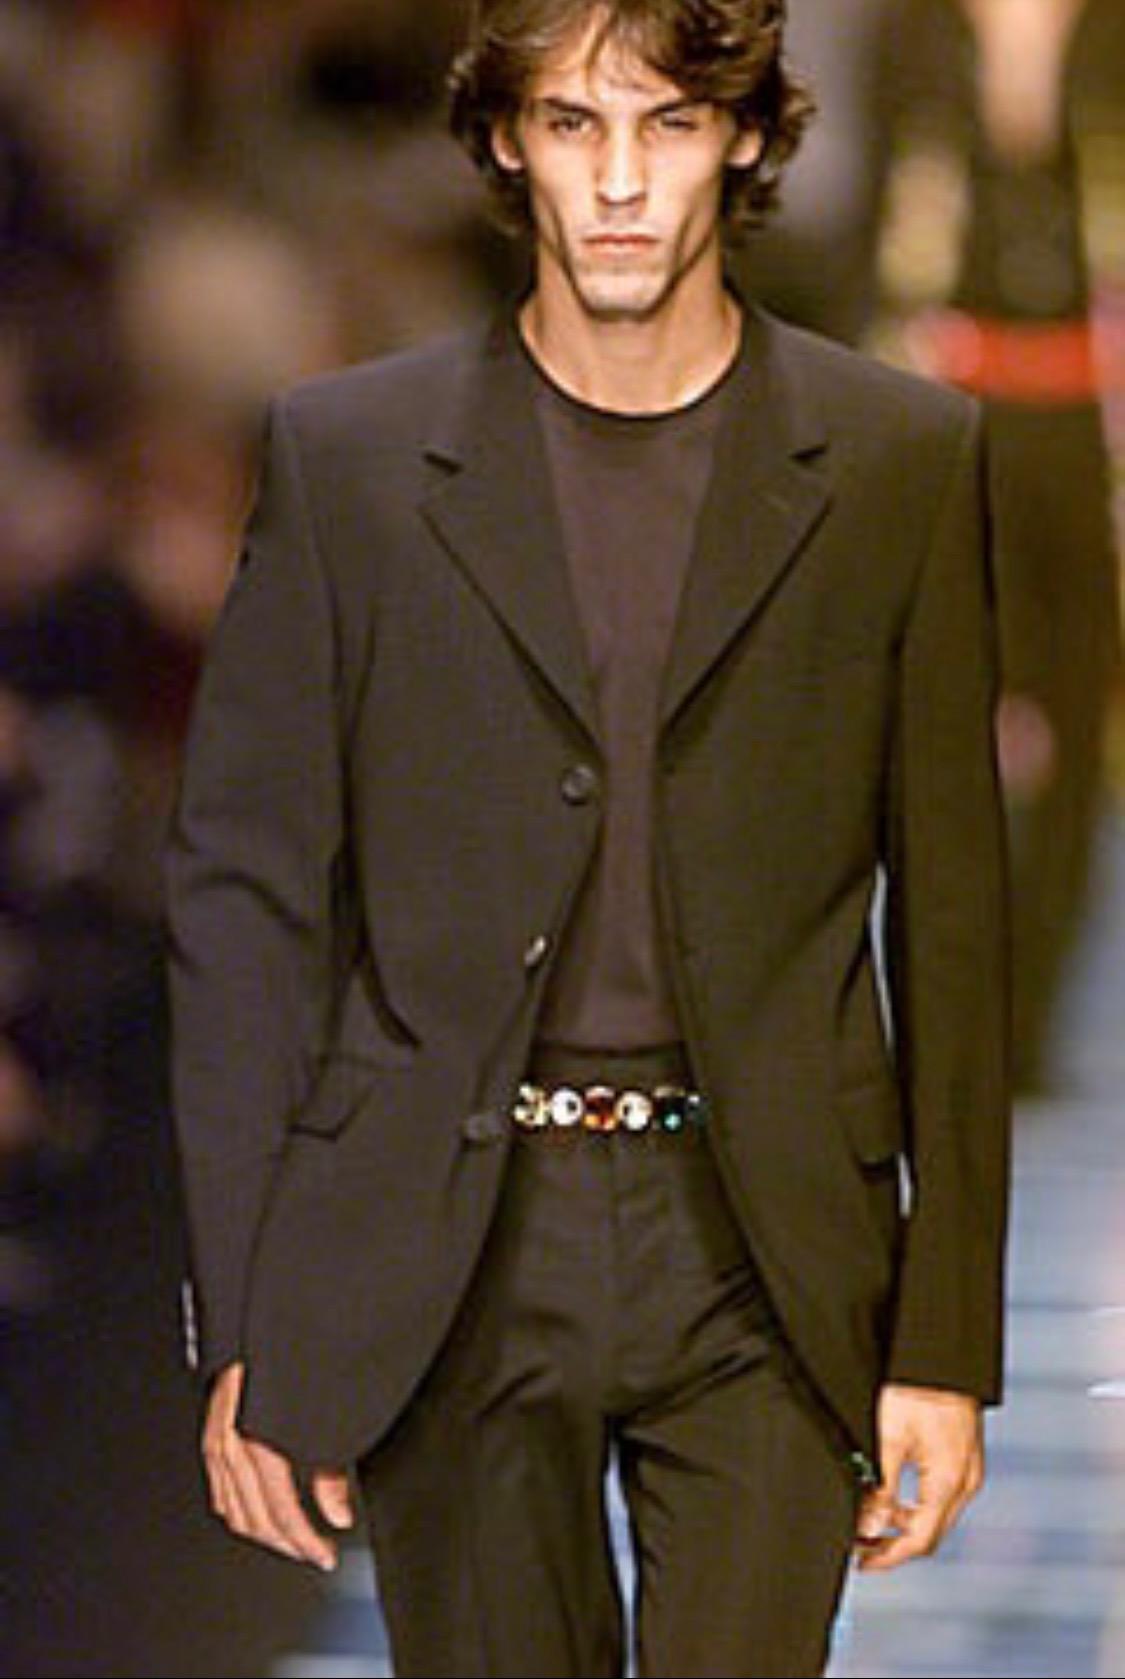 Black S/S 2000 Gianni Versace by Donatella Jewel Rhinestone Suede Belt Mens Documented For Sale